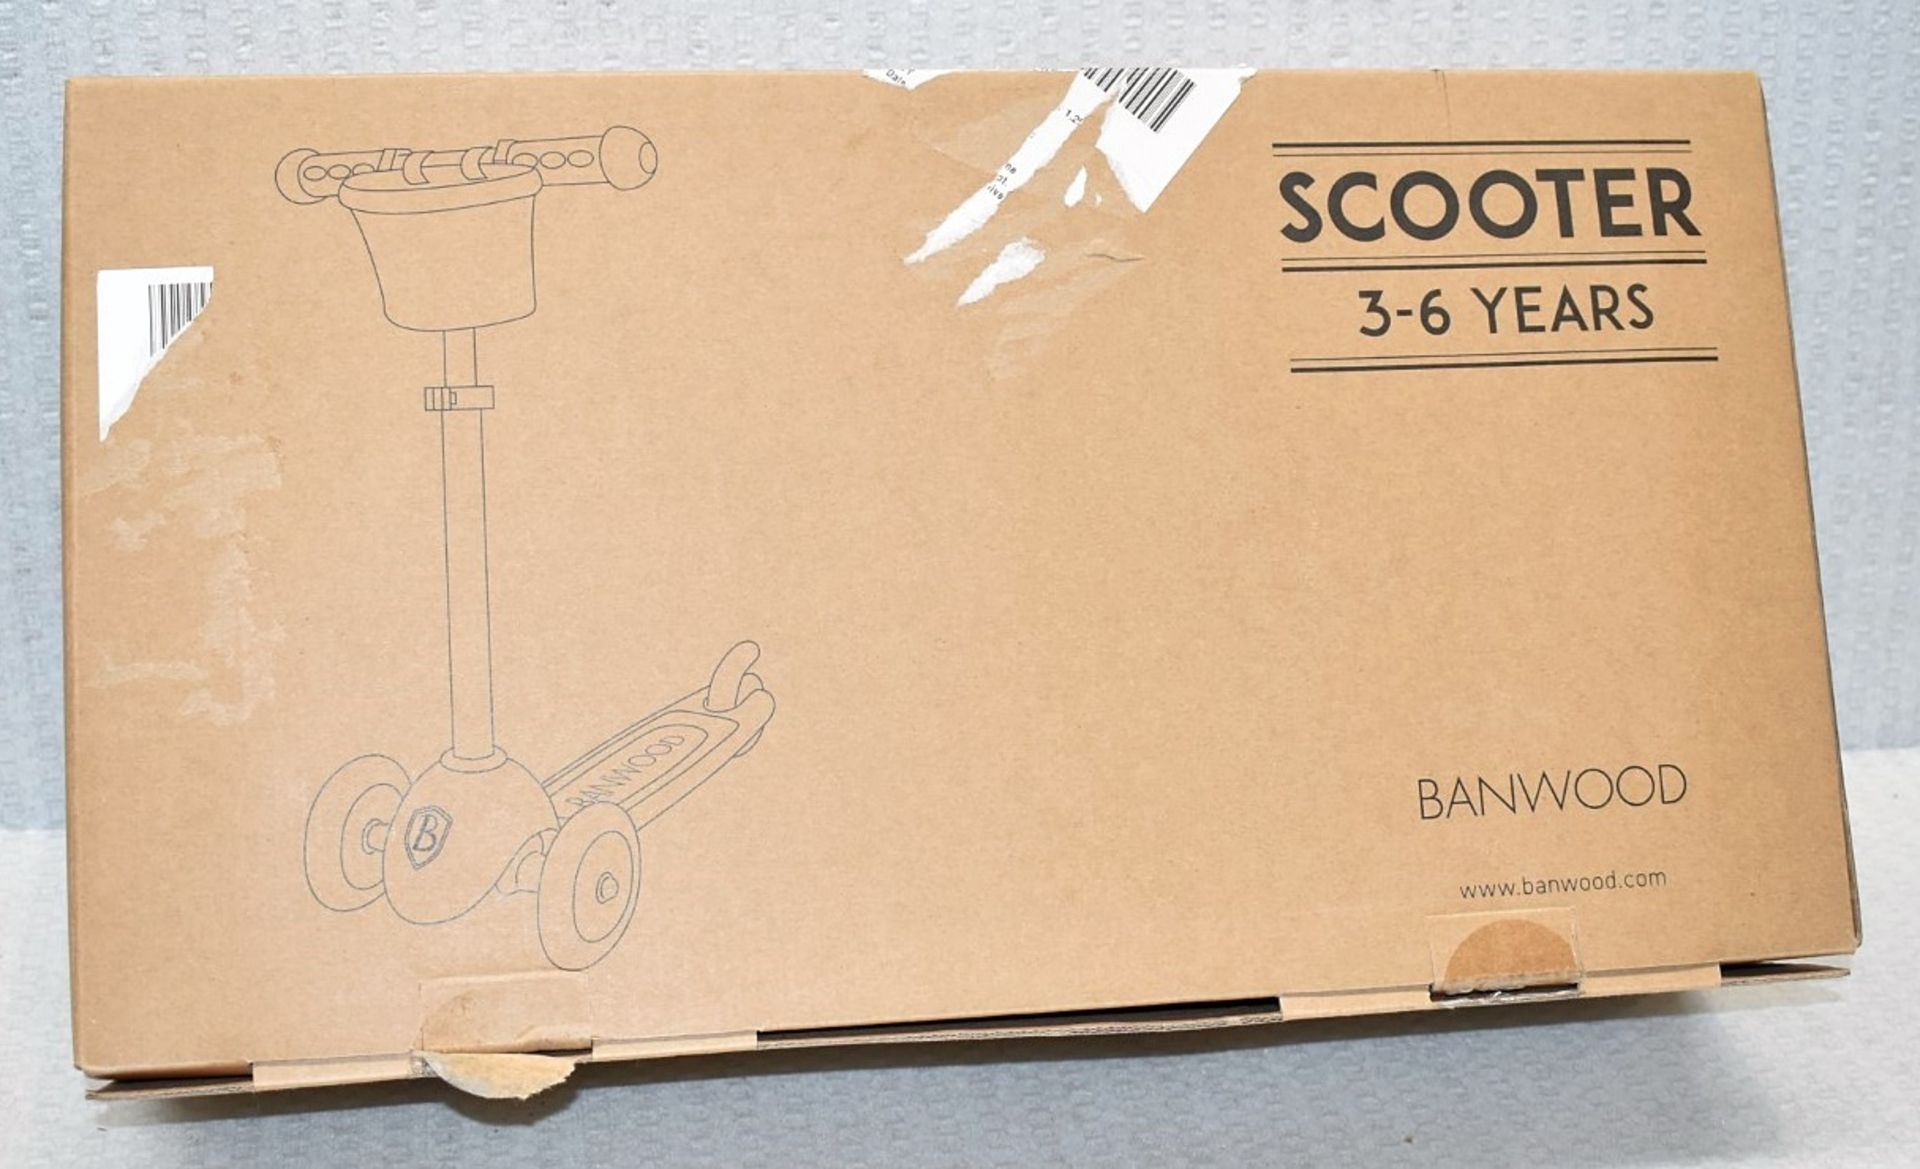 1 x BANWOOD Scooter Bike in Green - Original Price £119.00 - Boxed - Image 6 of 12